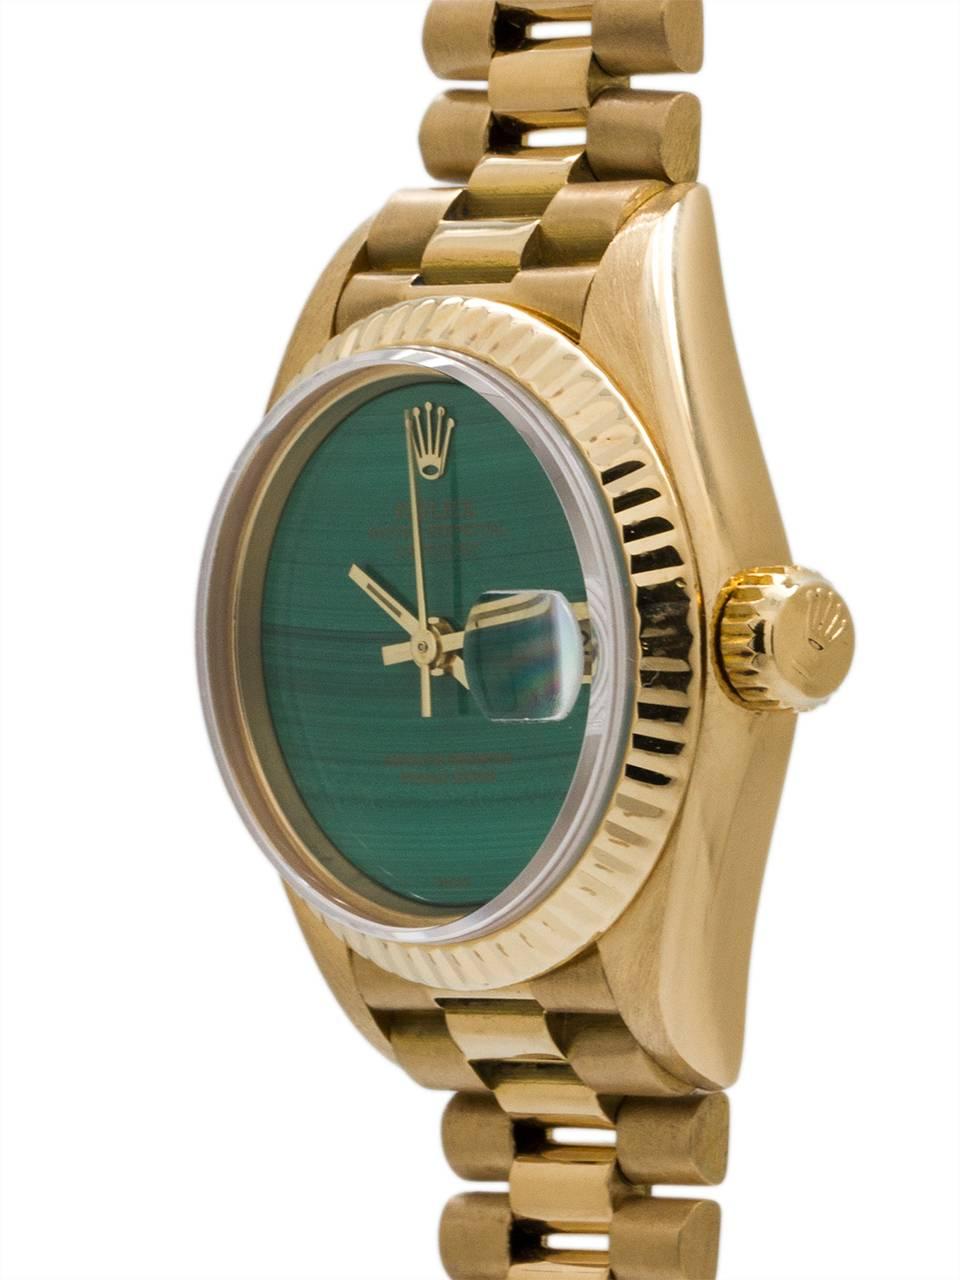 Exceptionally mint condition and stunning Rolex Lady President ref 69178 serial #8.4 million circa 1985. 27 x 33mm 18K yellow gold case with fluted bezel and sapphire crystal. Brilliant malachite stone dial with applied Rolex logo and date window.